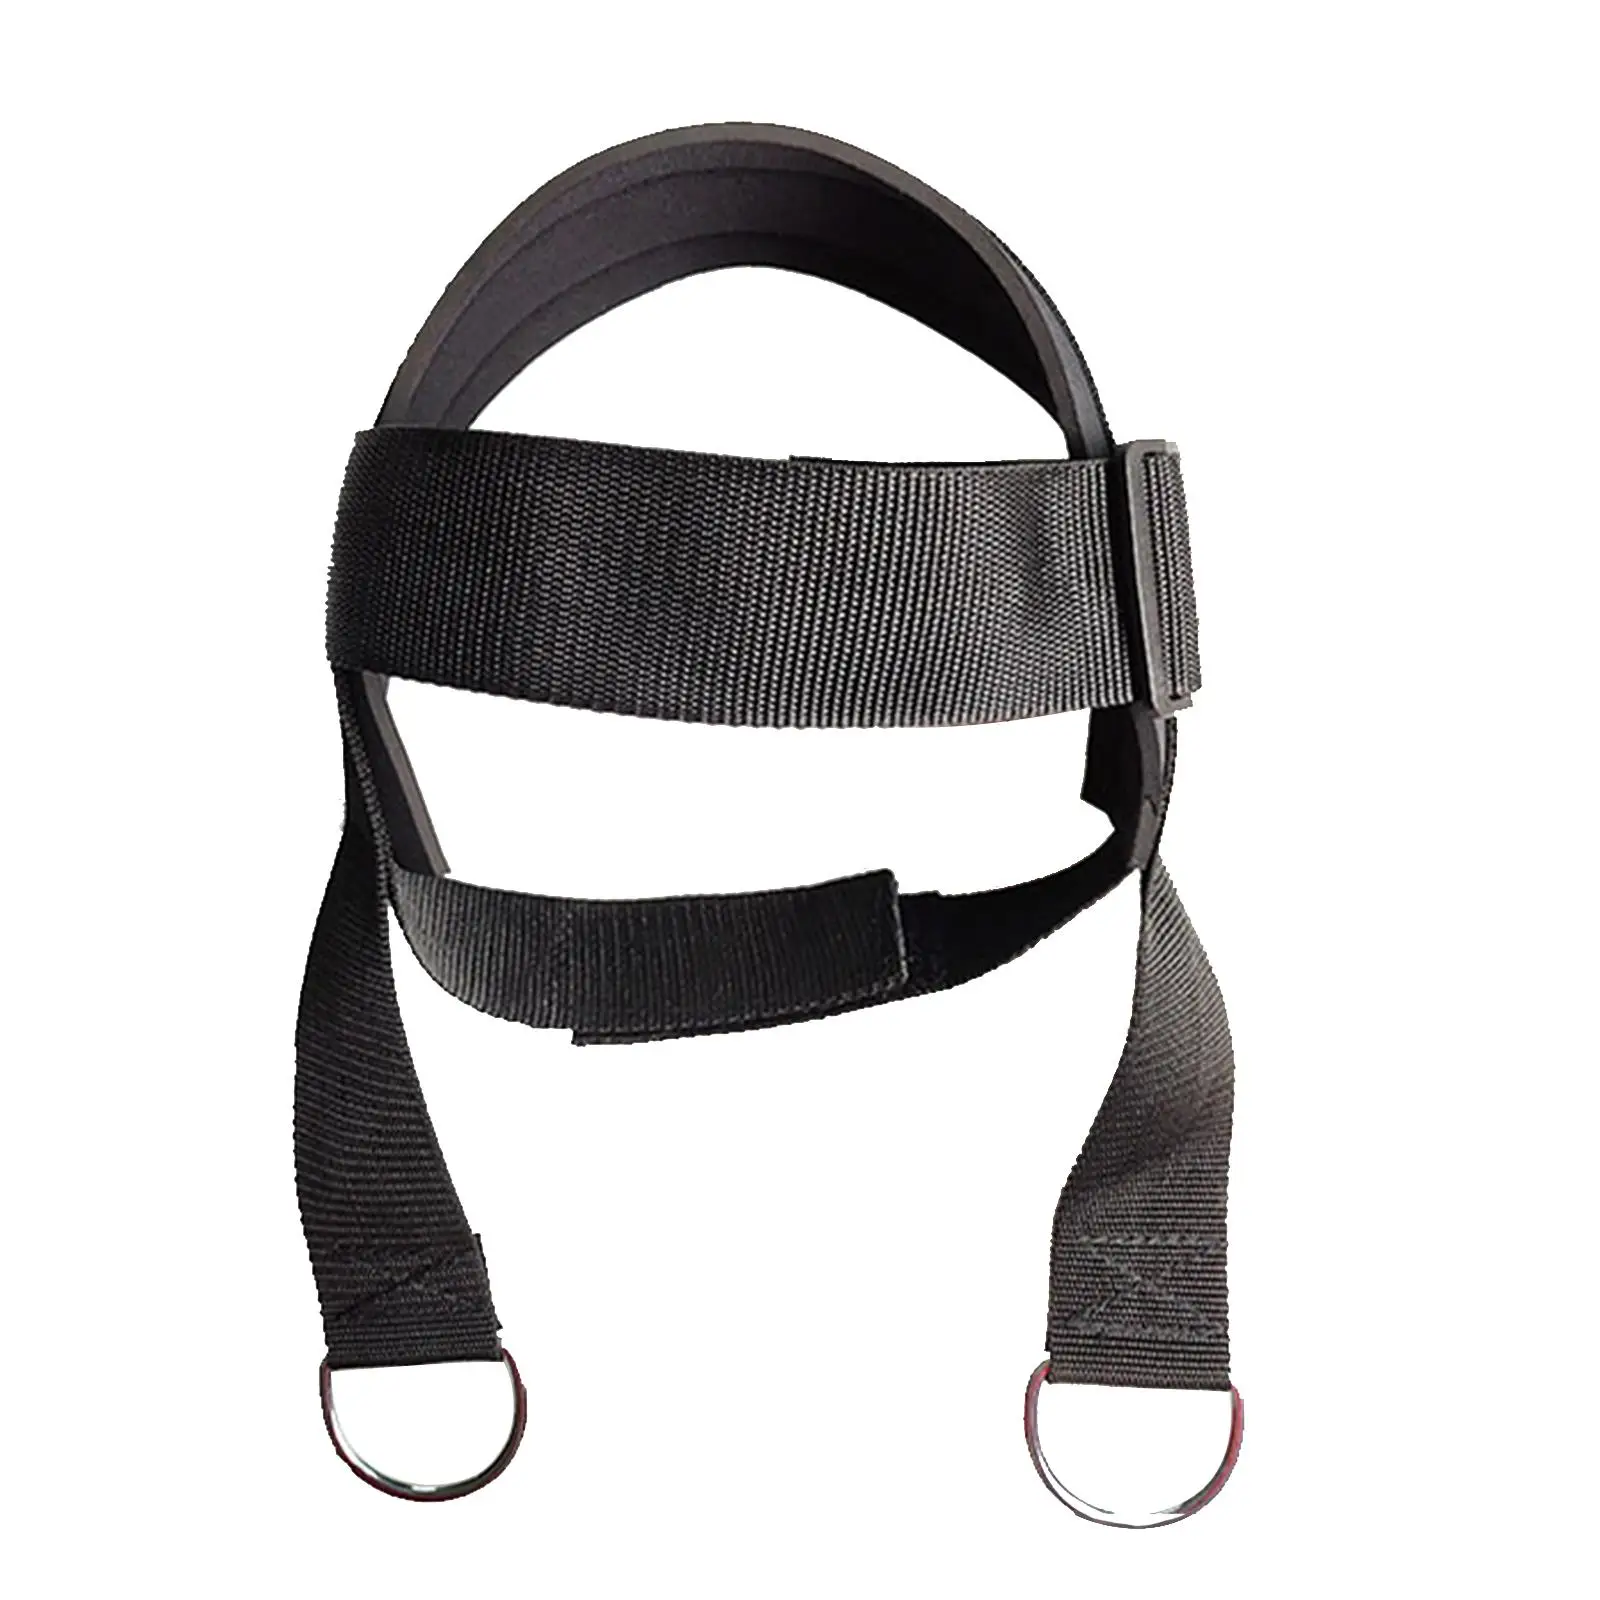 Head Neck Harness Strength Training Fitness Gym Workout Gym Weight Lifting